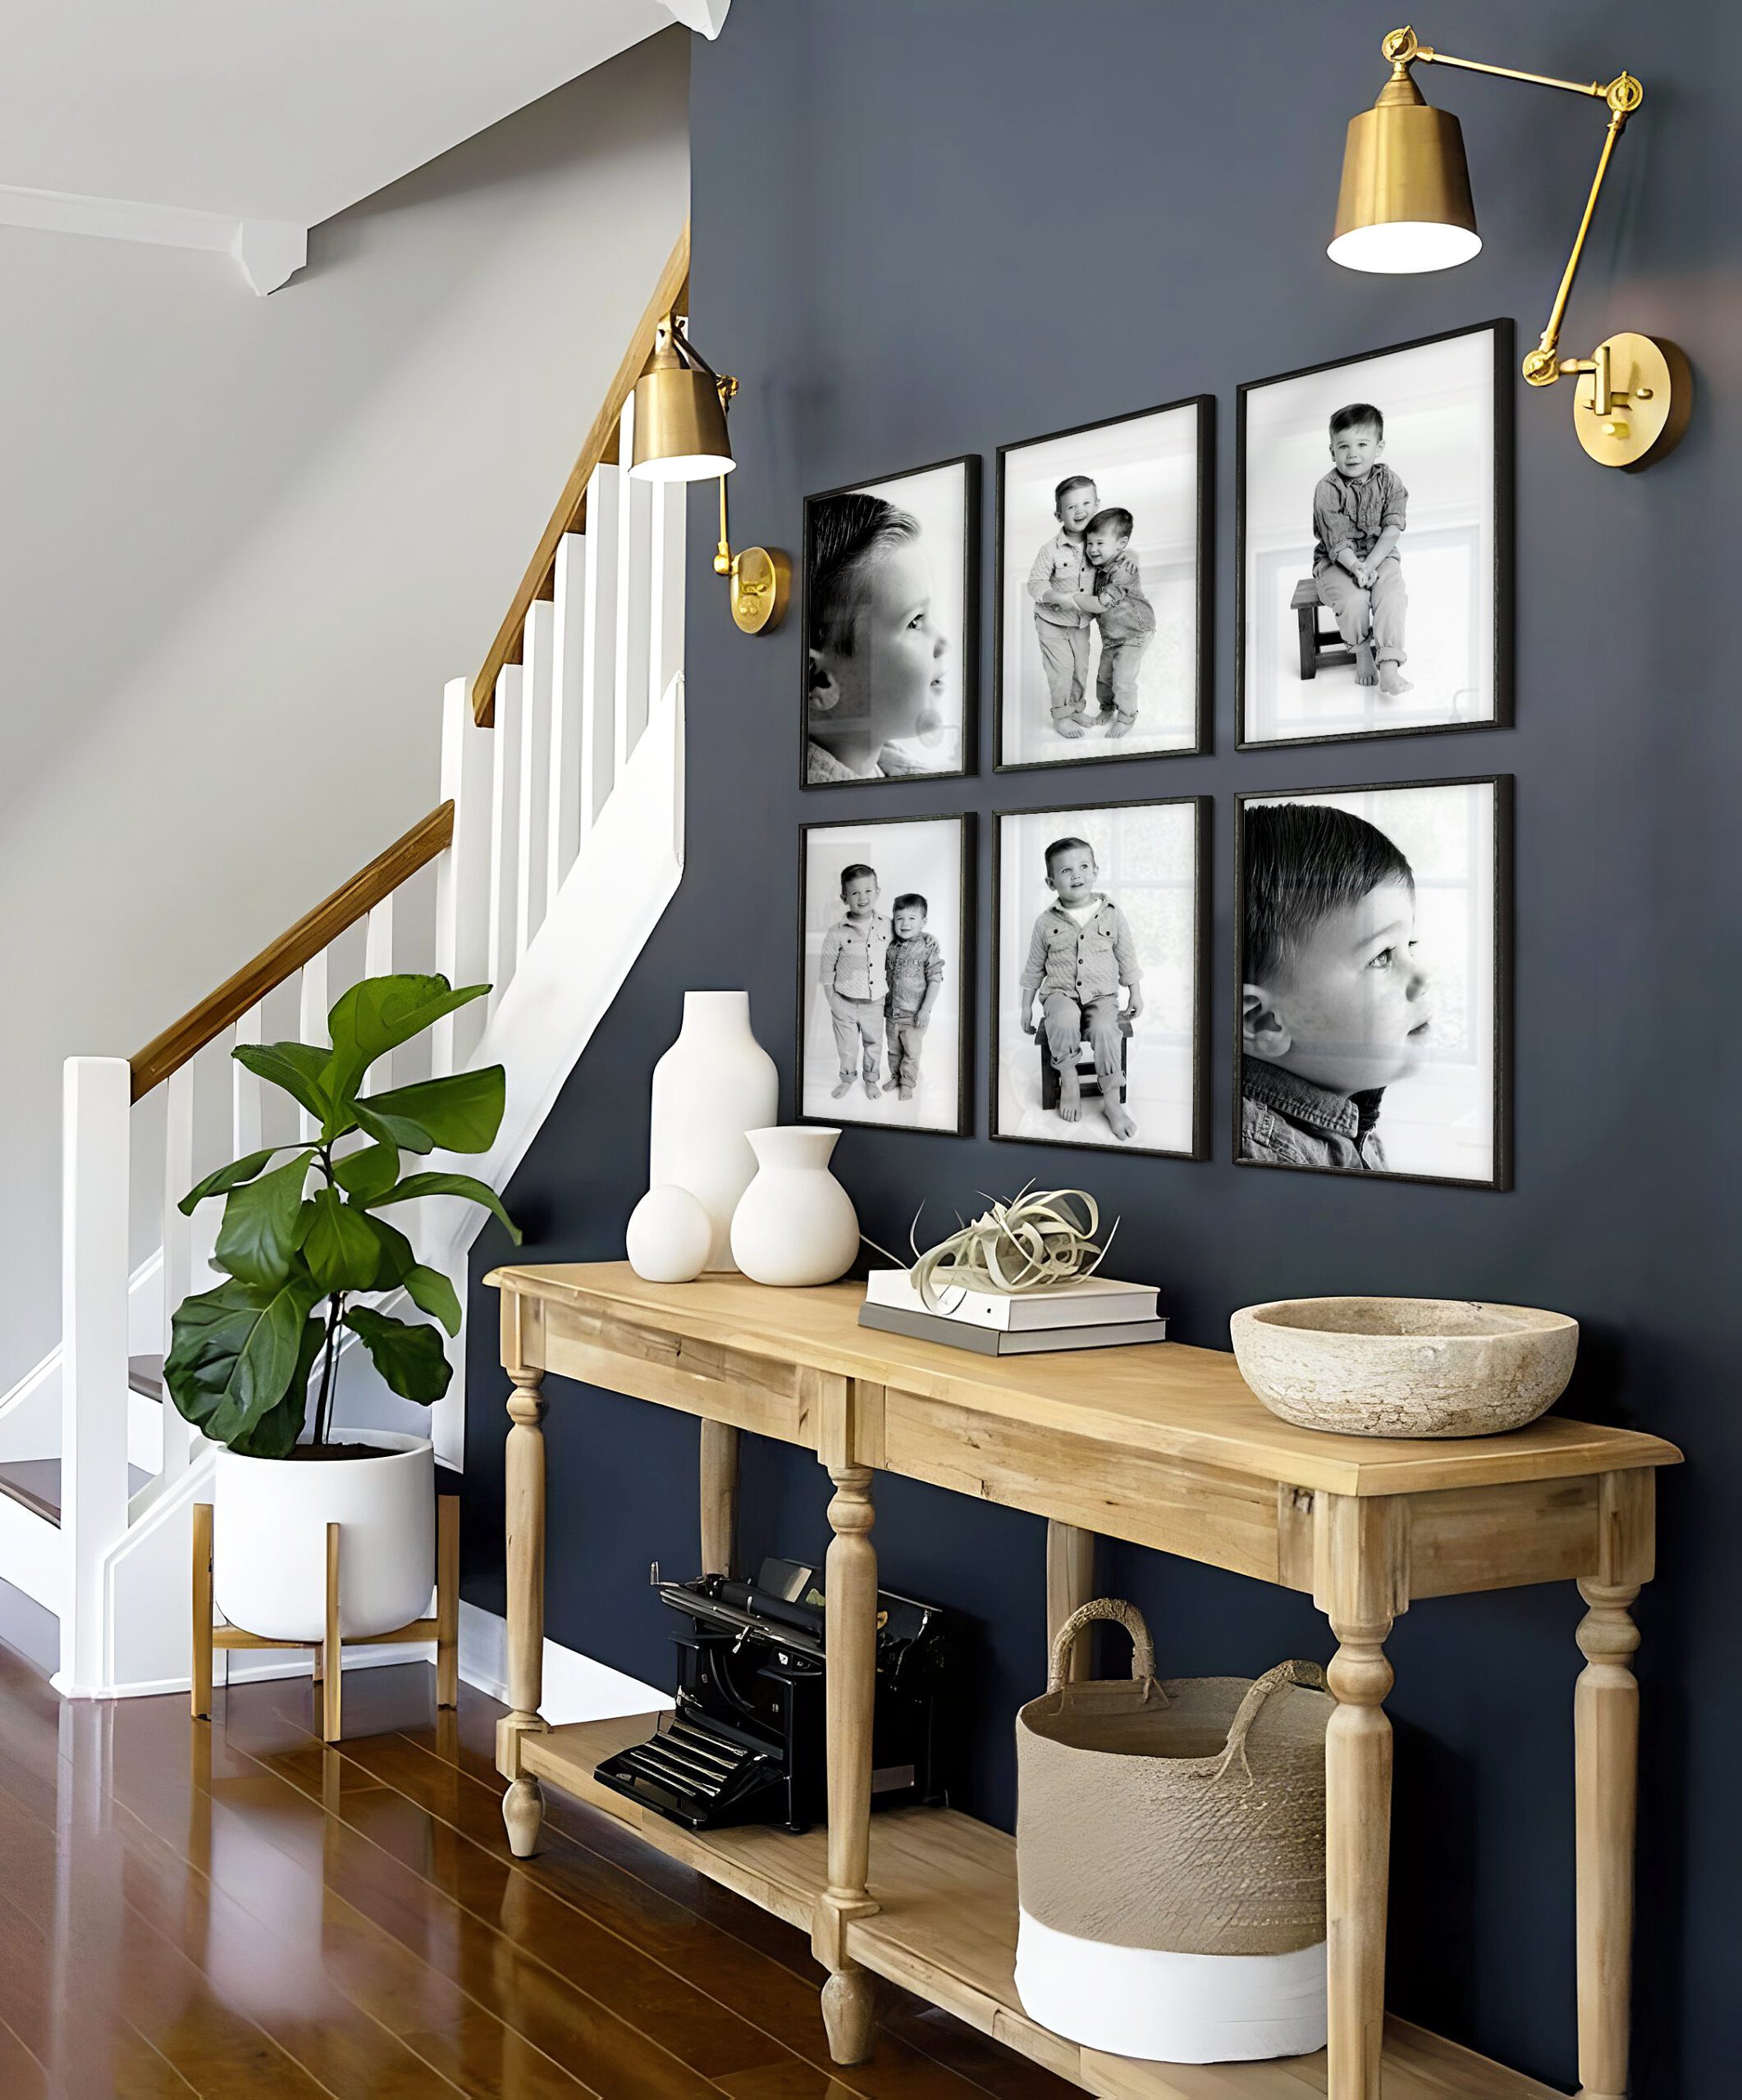 Wall art with black and white children images by Dallas Baby Photography